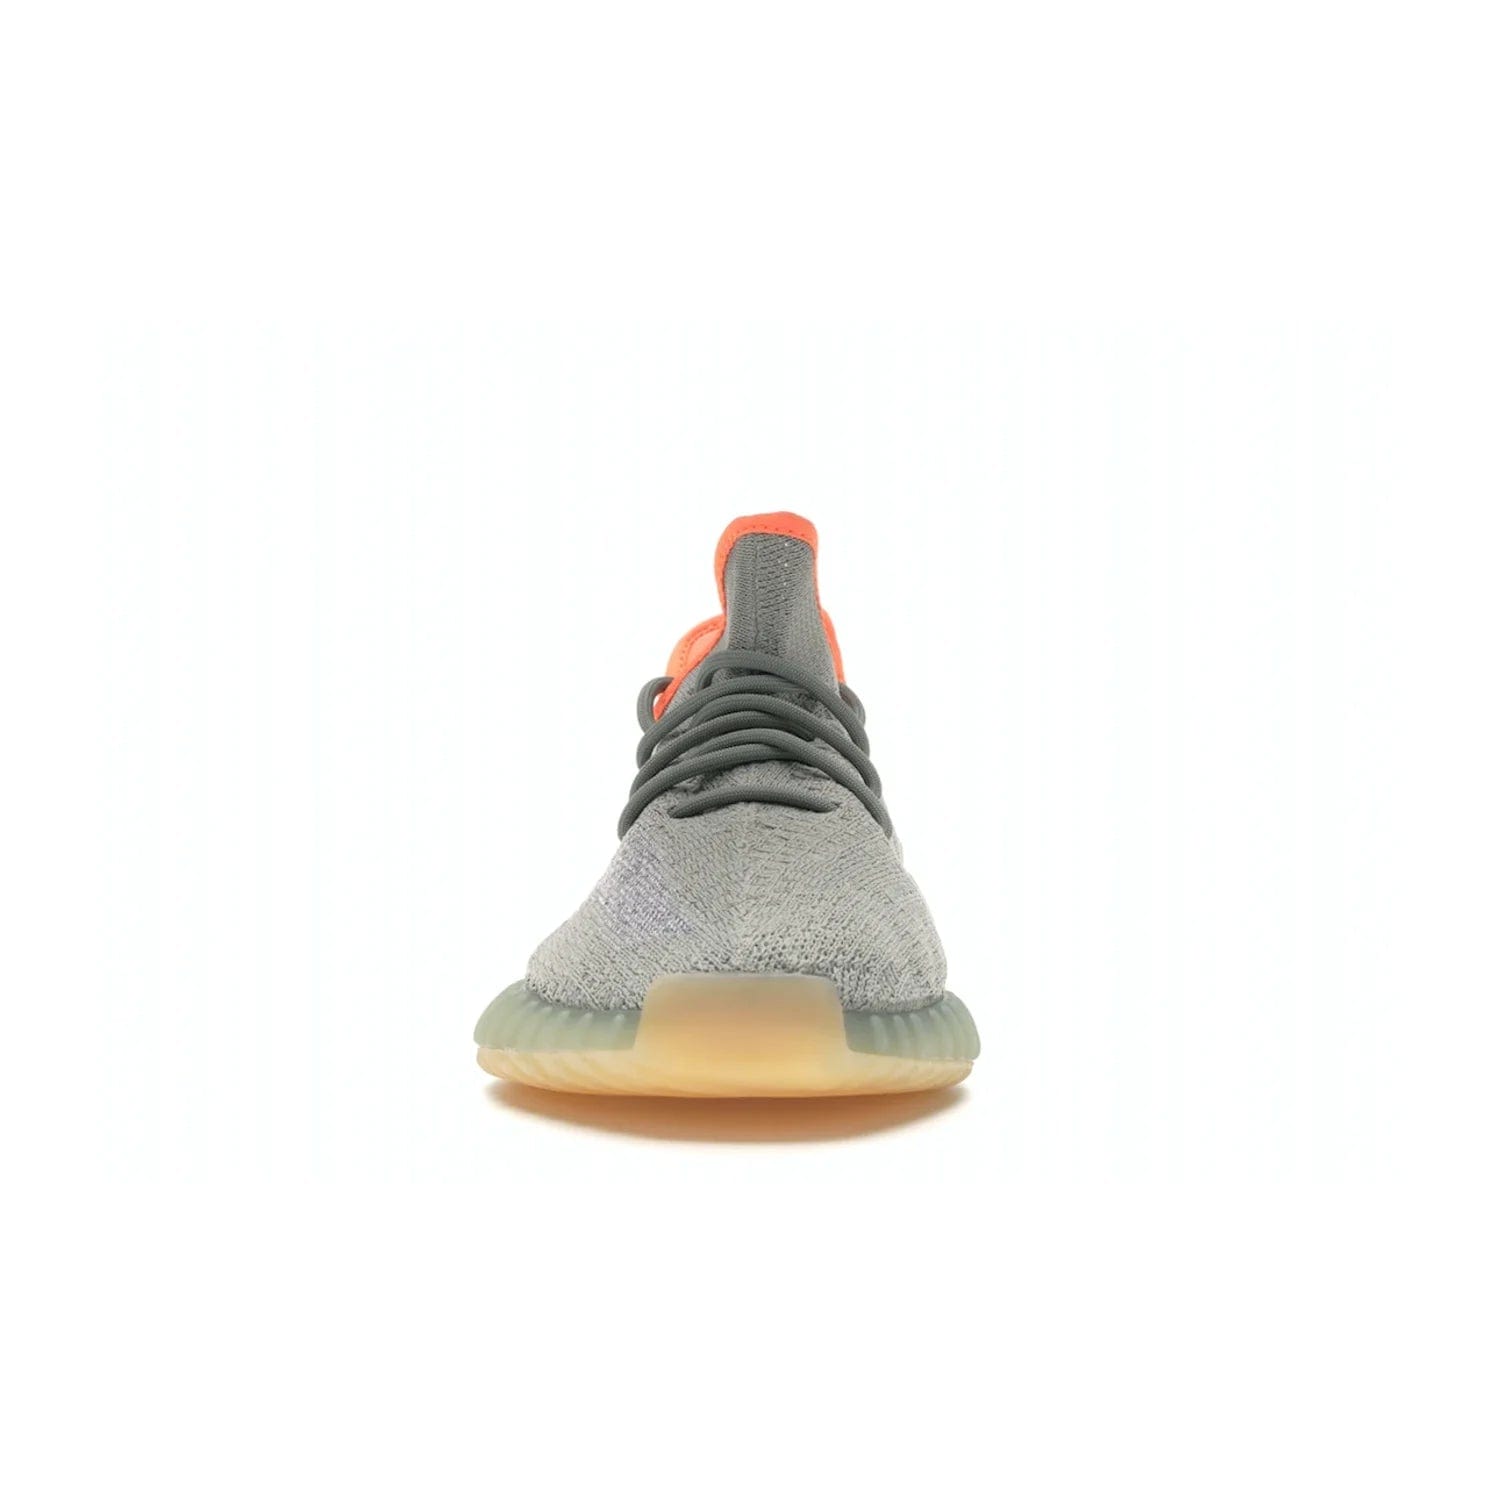 adidas Yeezy Boost 350 V2 Desert Sage - Image 10 - Only at www.BallersClubKickz.com - Upgrade your style with the adidas Yeezy Boost 350 V2 Desert Sage. This 350V2 features a Desert Sage primeknit upper with tonal side stripe, and an orange-highlighted translucent Boost cushioning sole. Stay on-trend in effortless style.